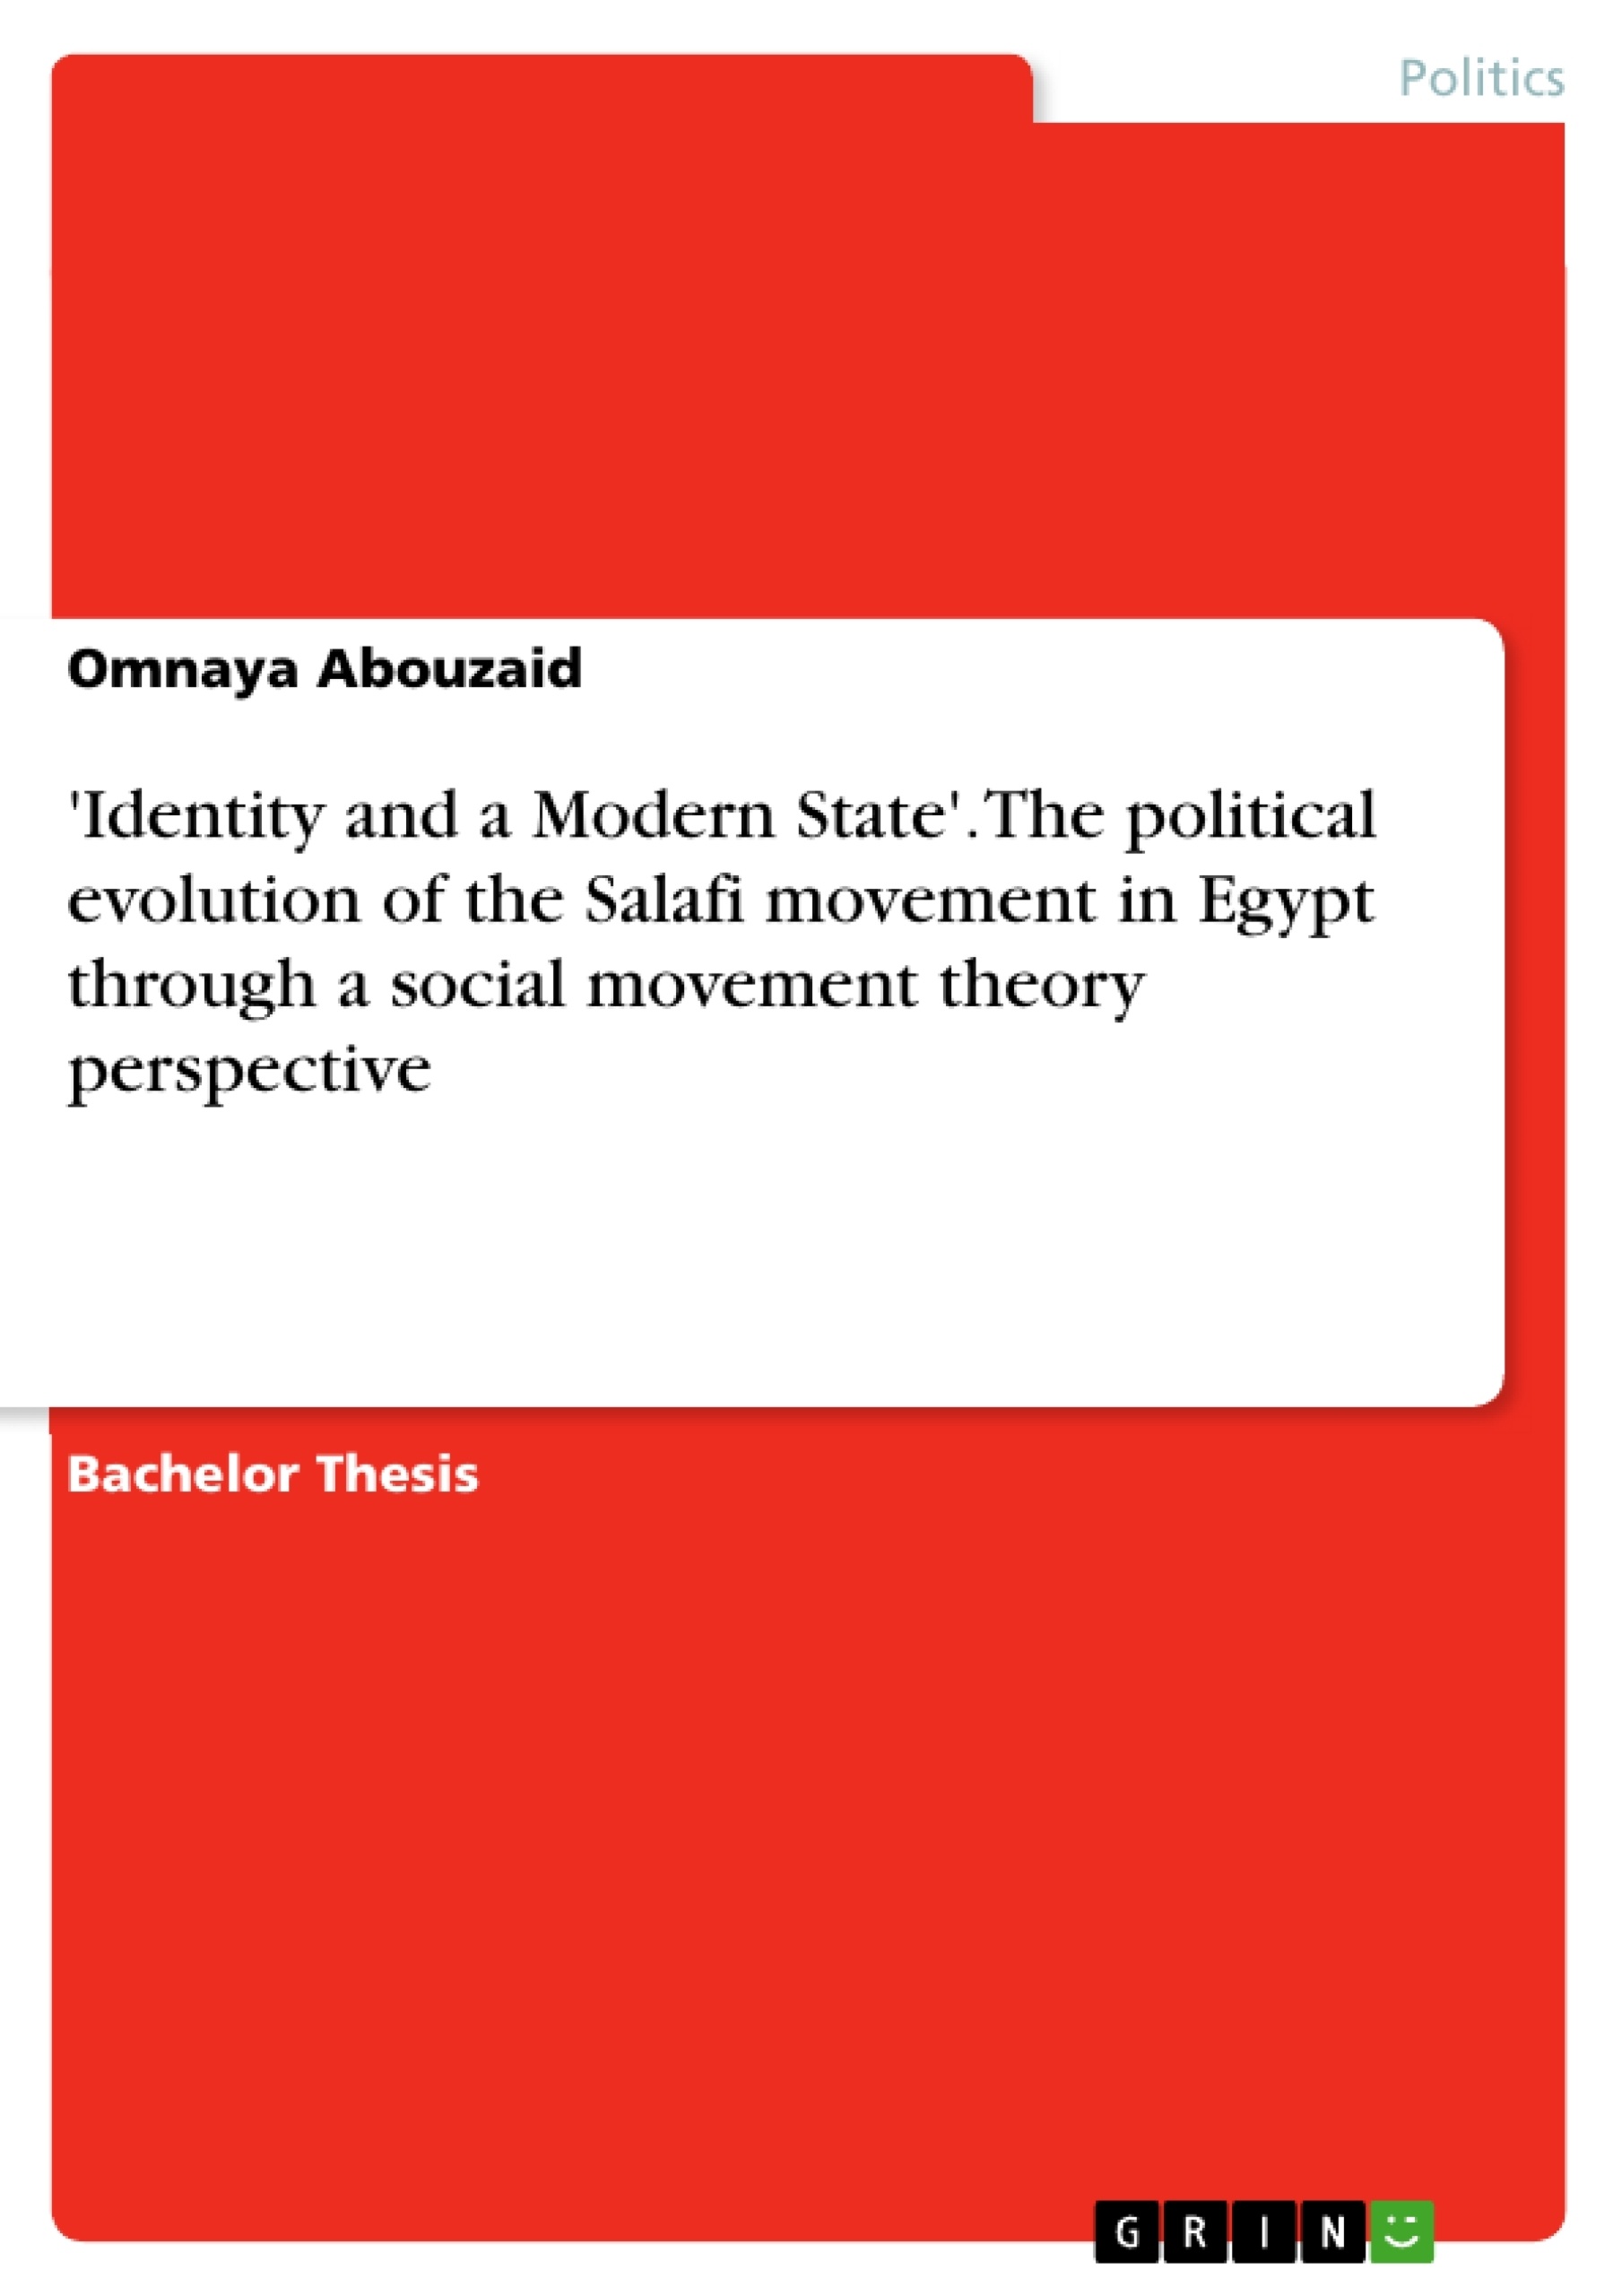 Título: 'Identity and a Modern State'. The political evolution of the Salafi movement in Egypt through a social movement theory perspective